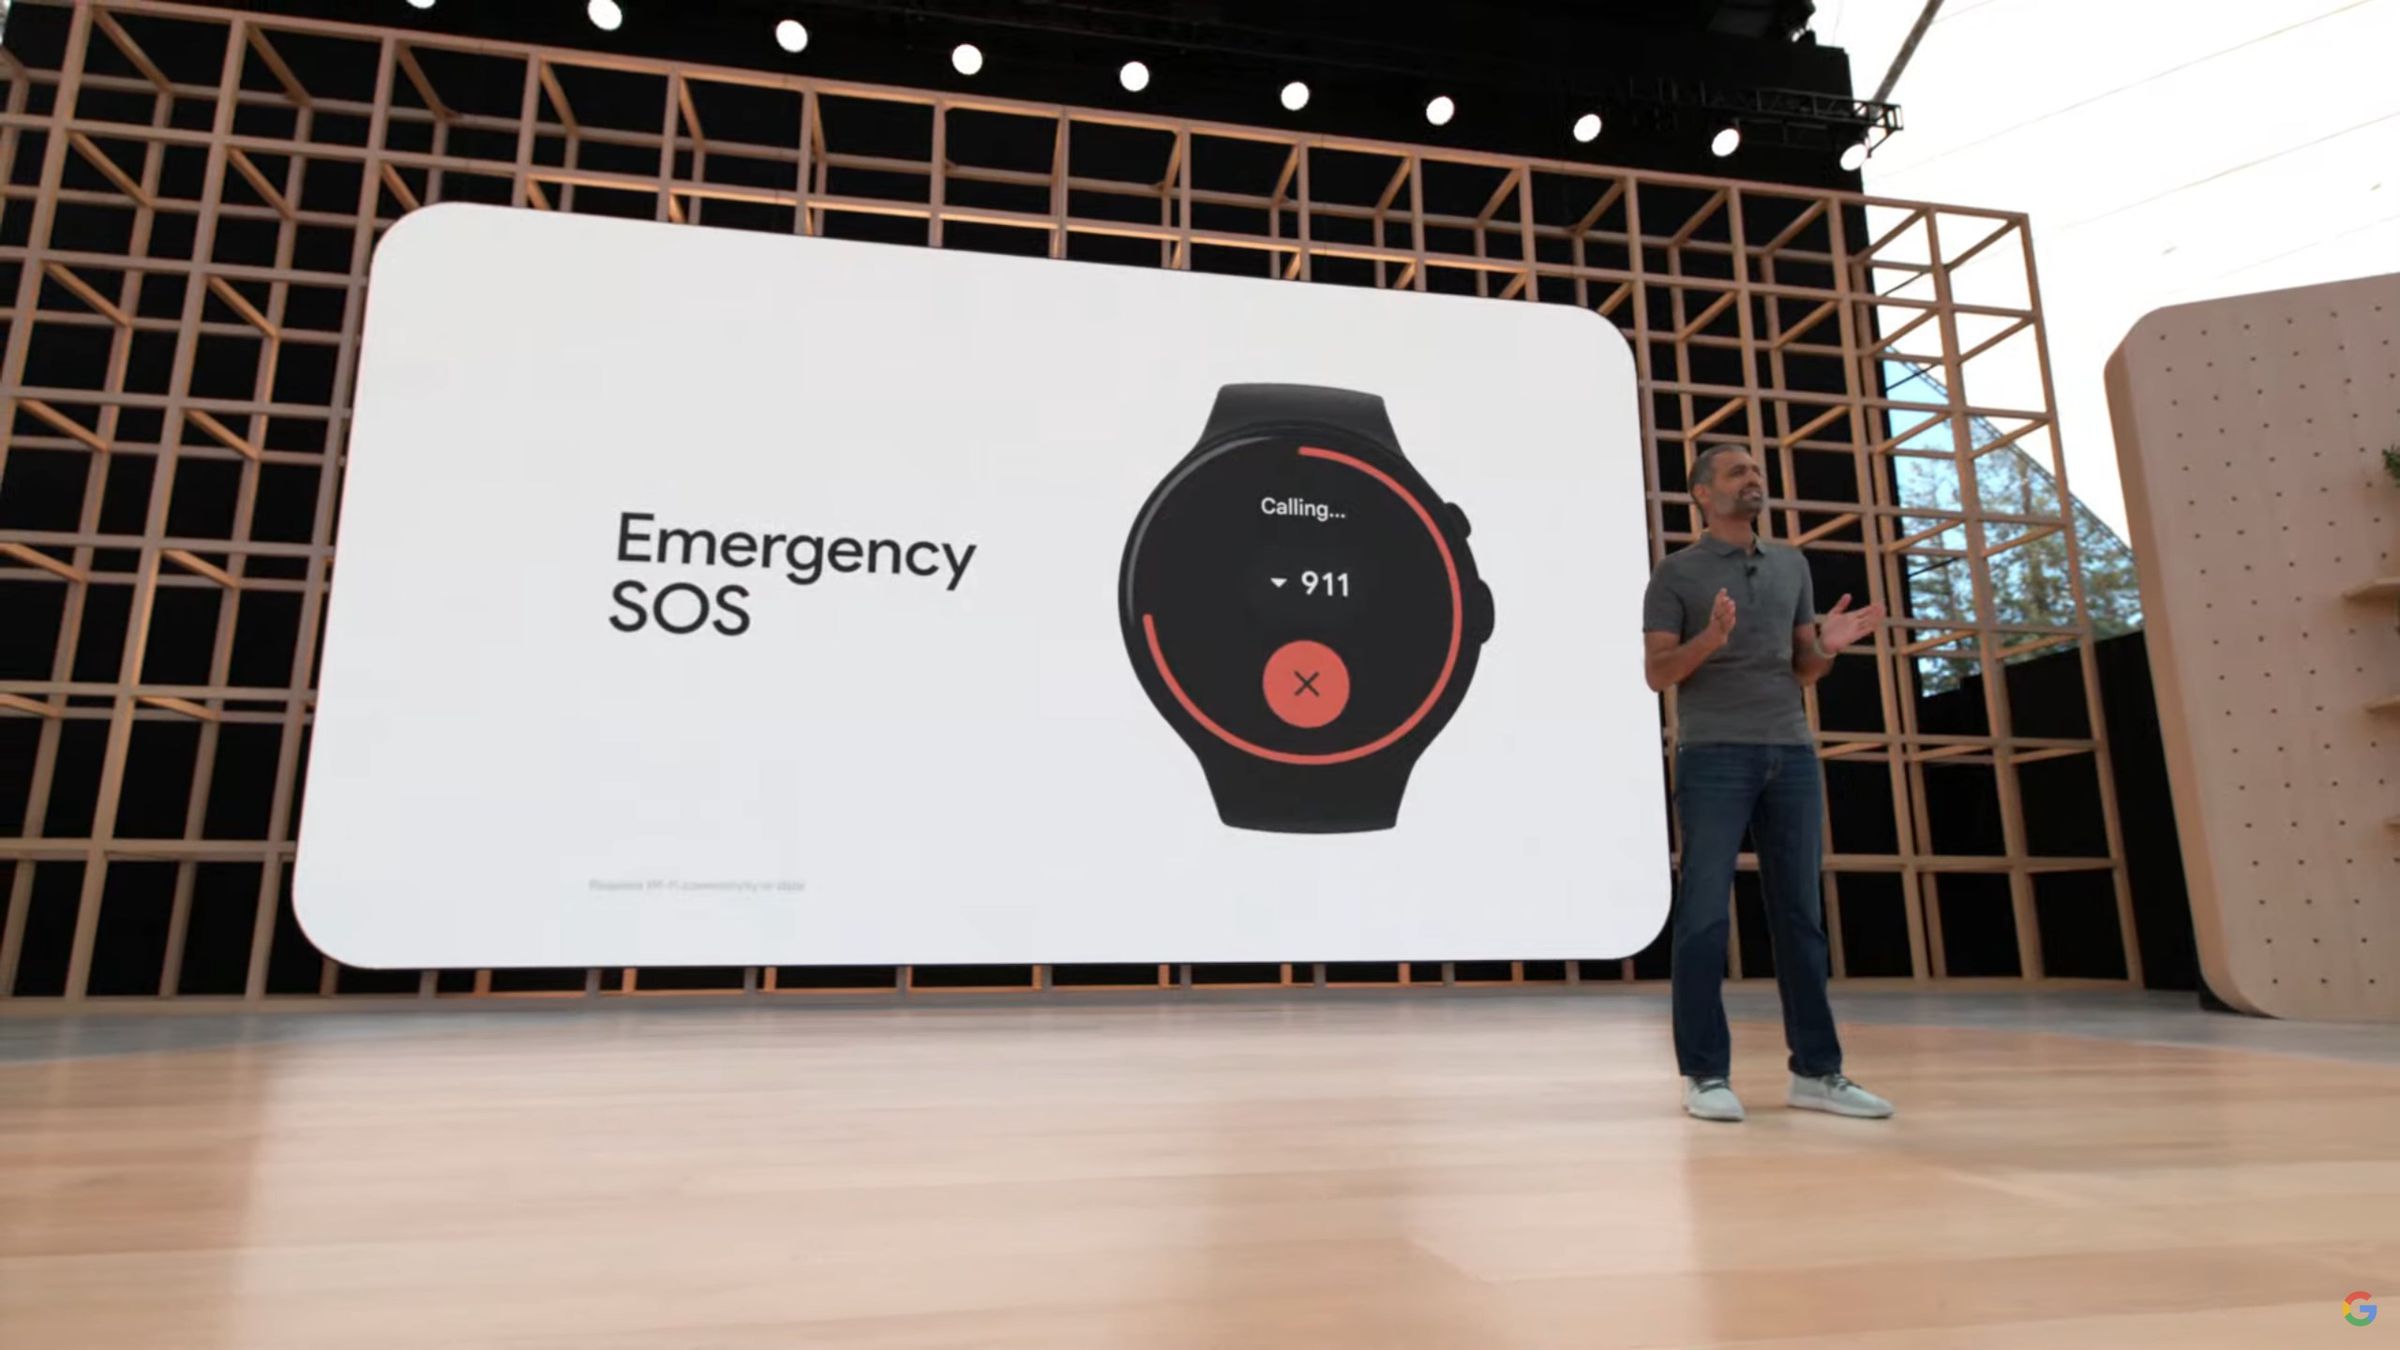 Emergency SOS calls will come to Wear OS 3 later this year.